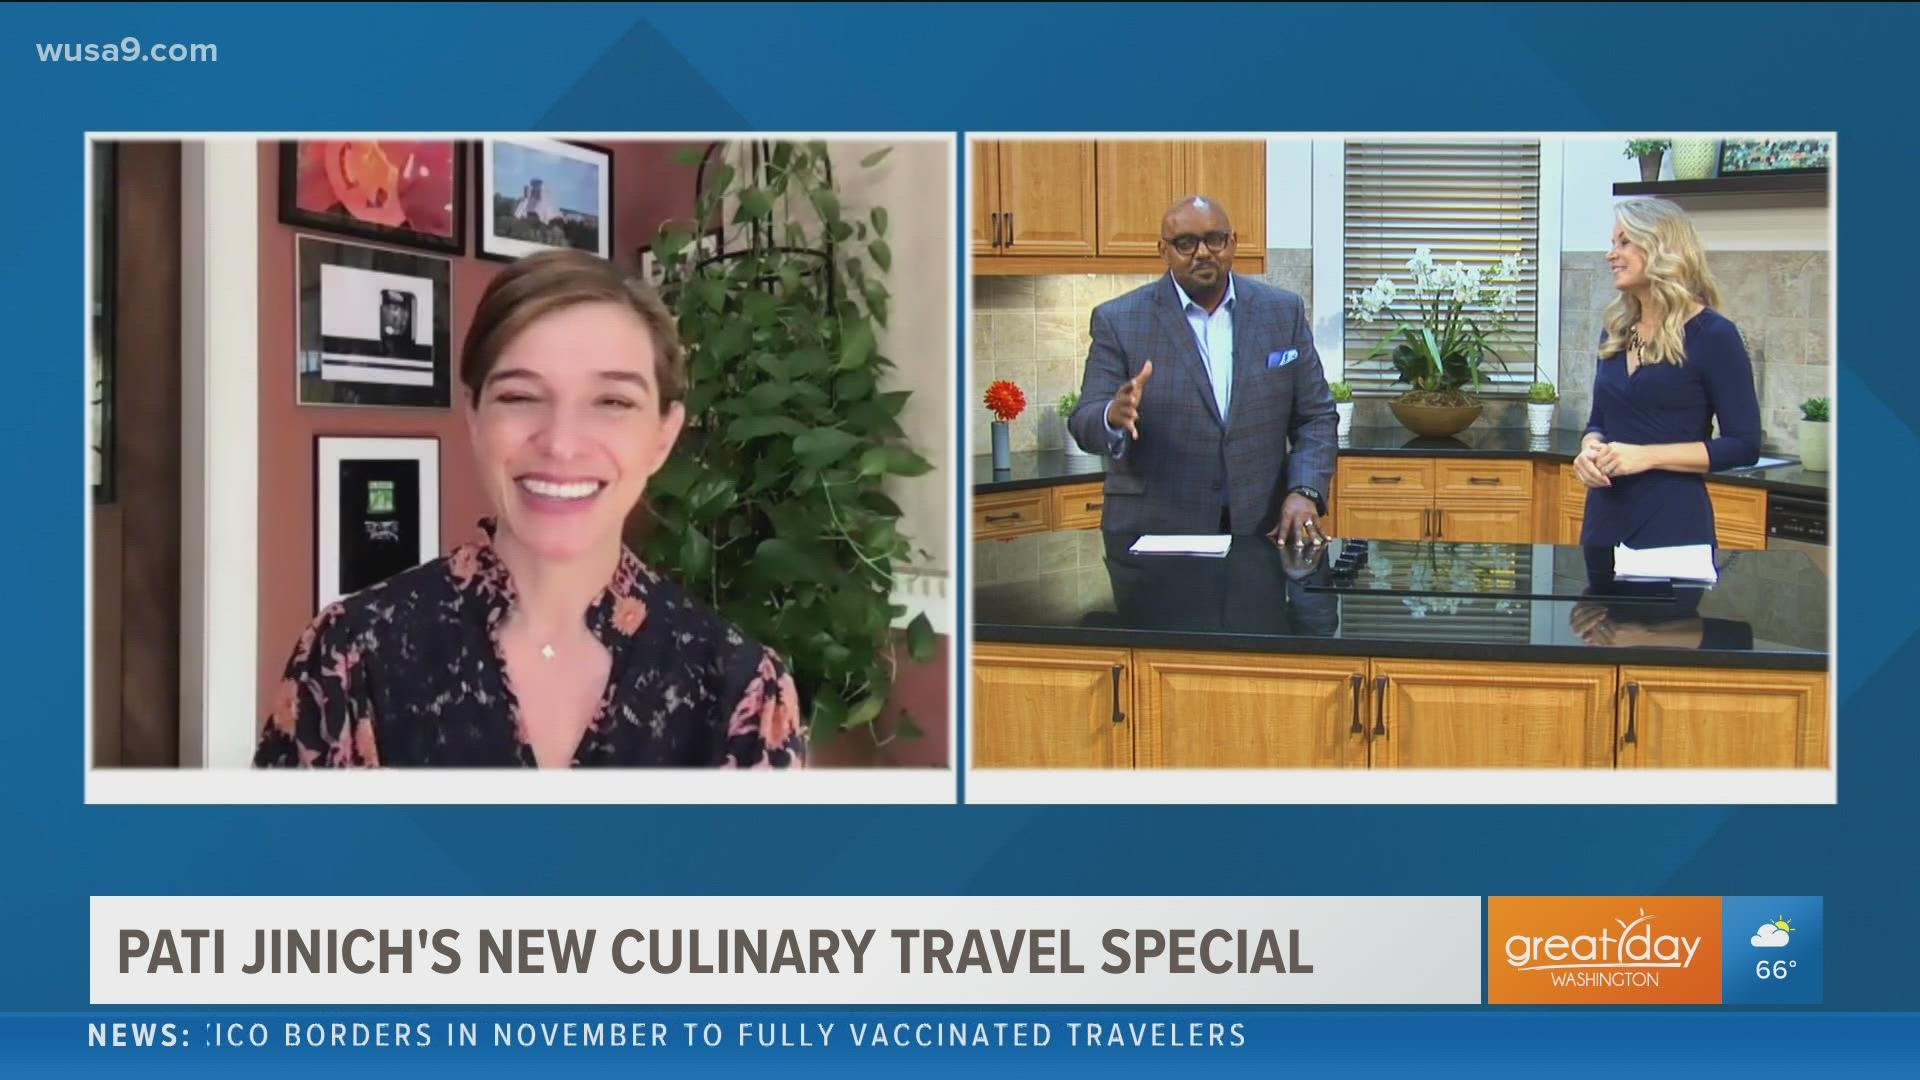 3-time James Beard award-winning chef Pati Jinich shares details about her new culinary travel special "La Frontera" and her latest cookbook.